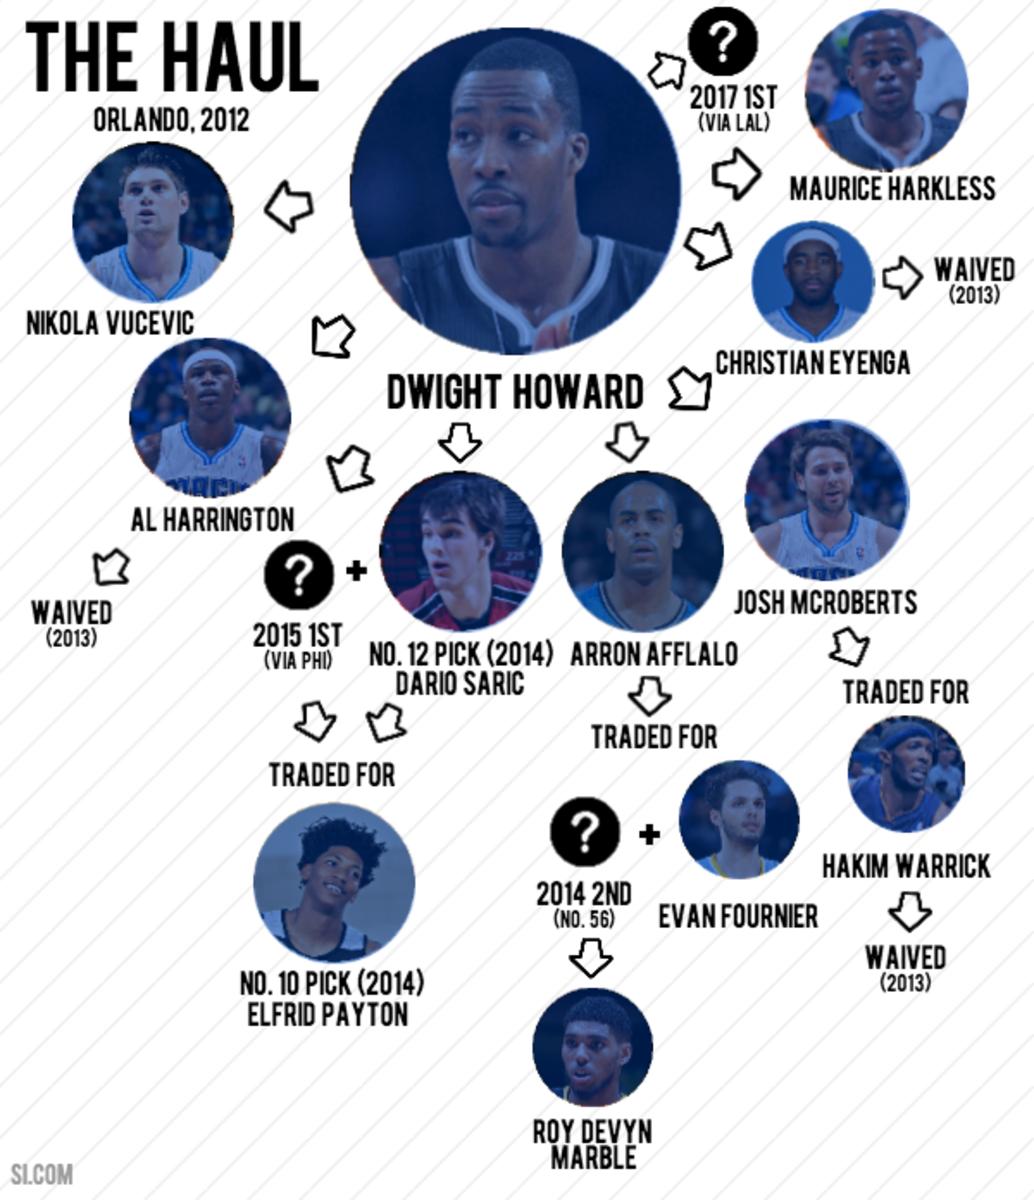 dwight howard infographic